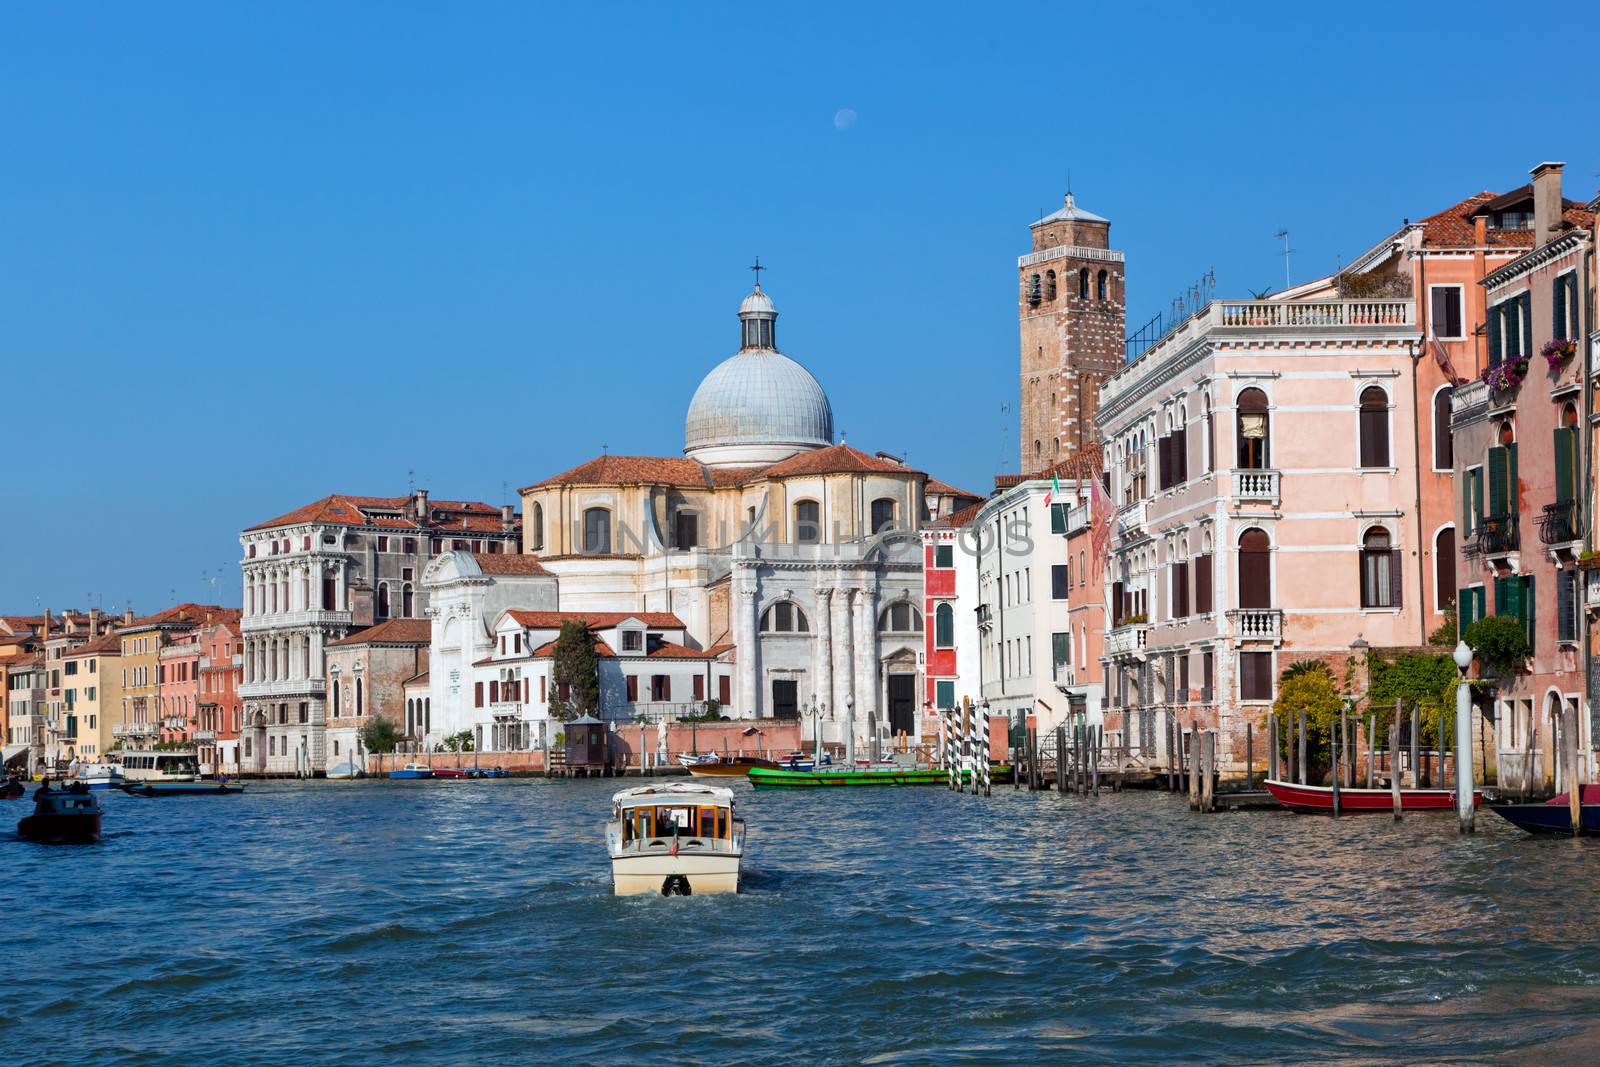 Venice Grand Canal, Italian Canal Grande at sunny summer day. Old Venetian architecture, boats